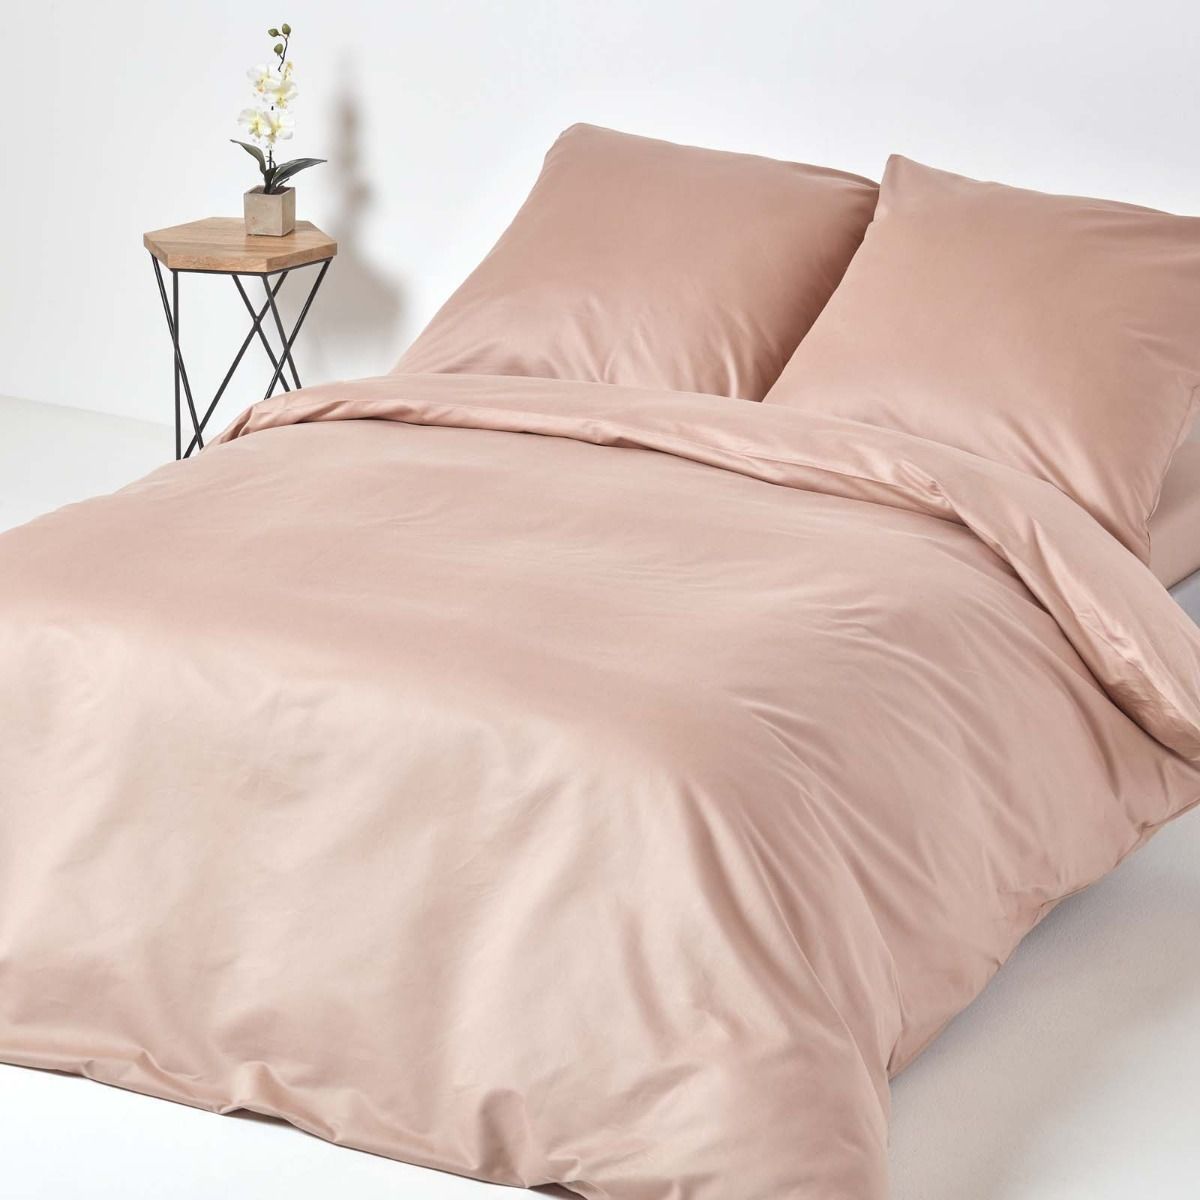 Mink Continental Egyptian Cotton Duvet Cover Set 1000 Thread Count